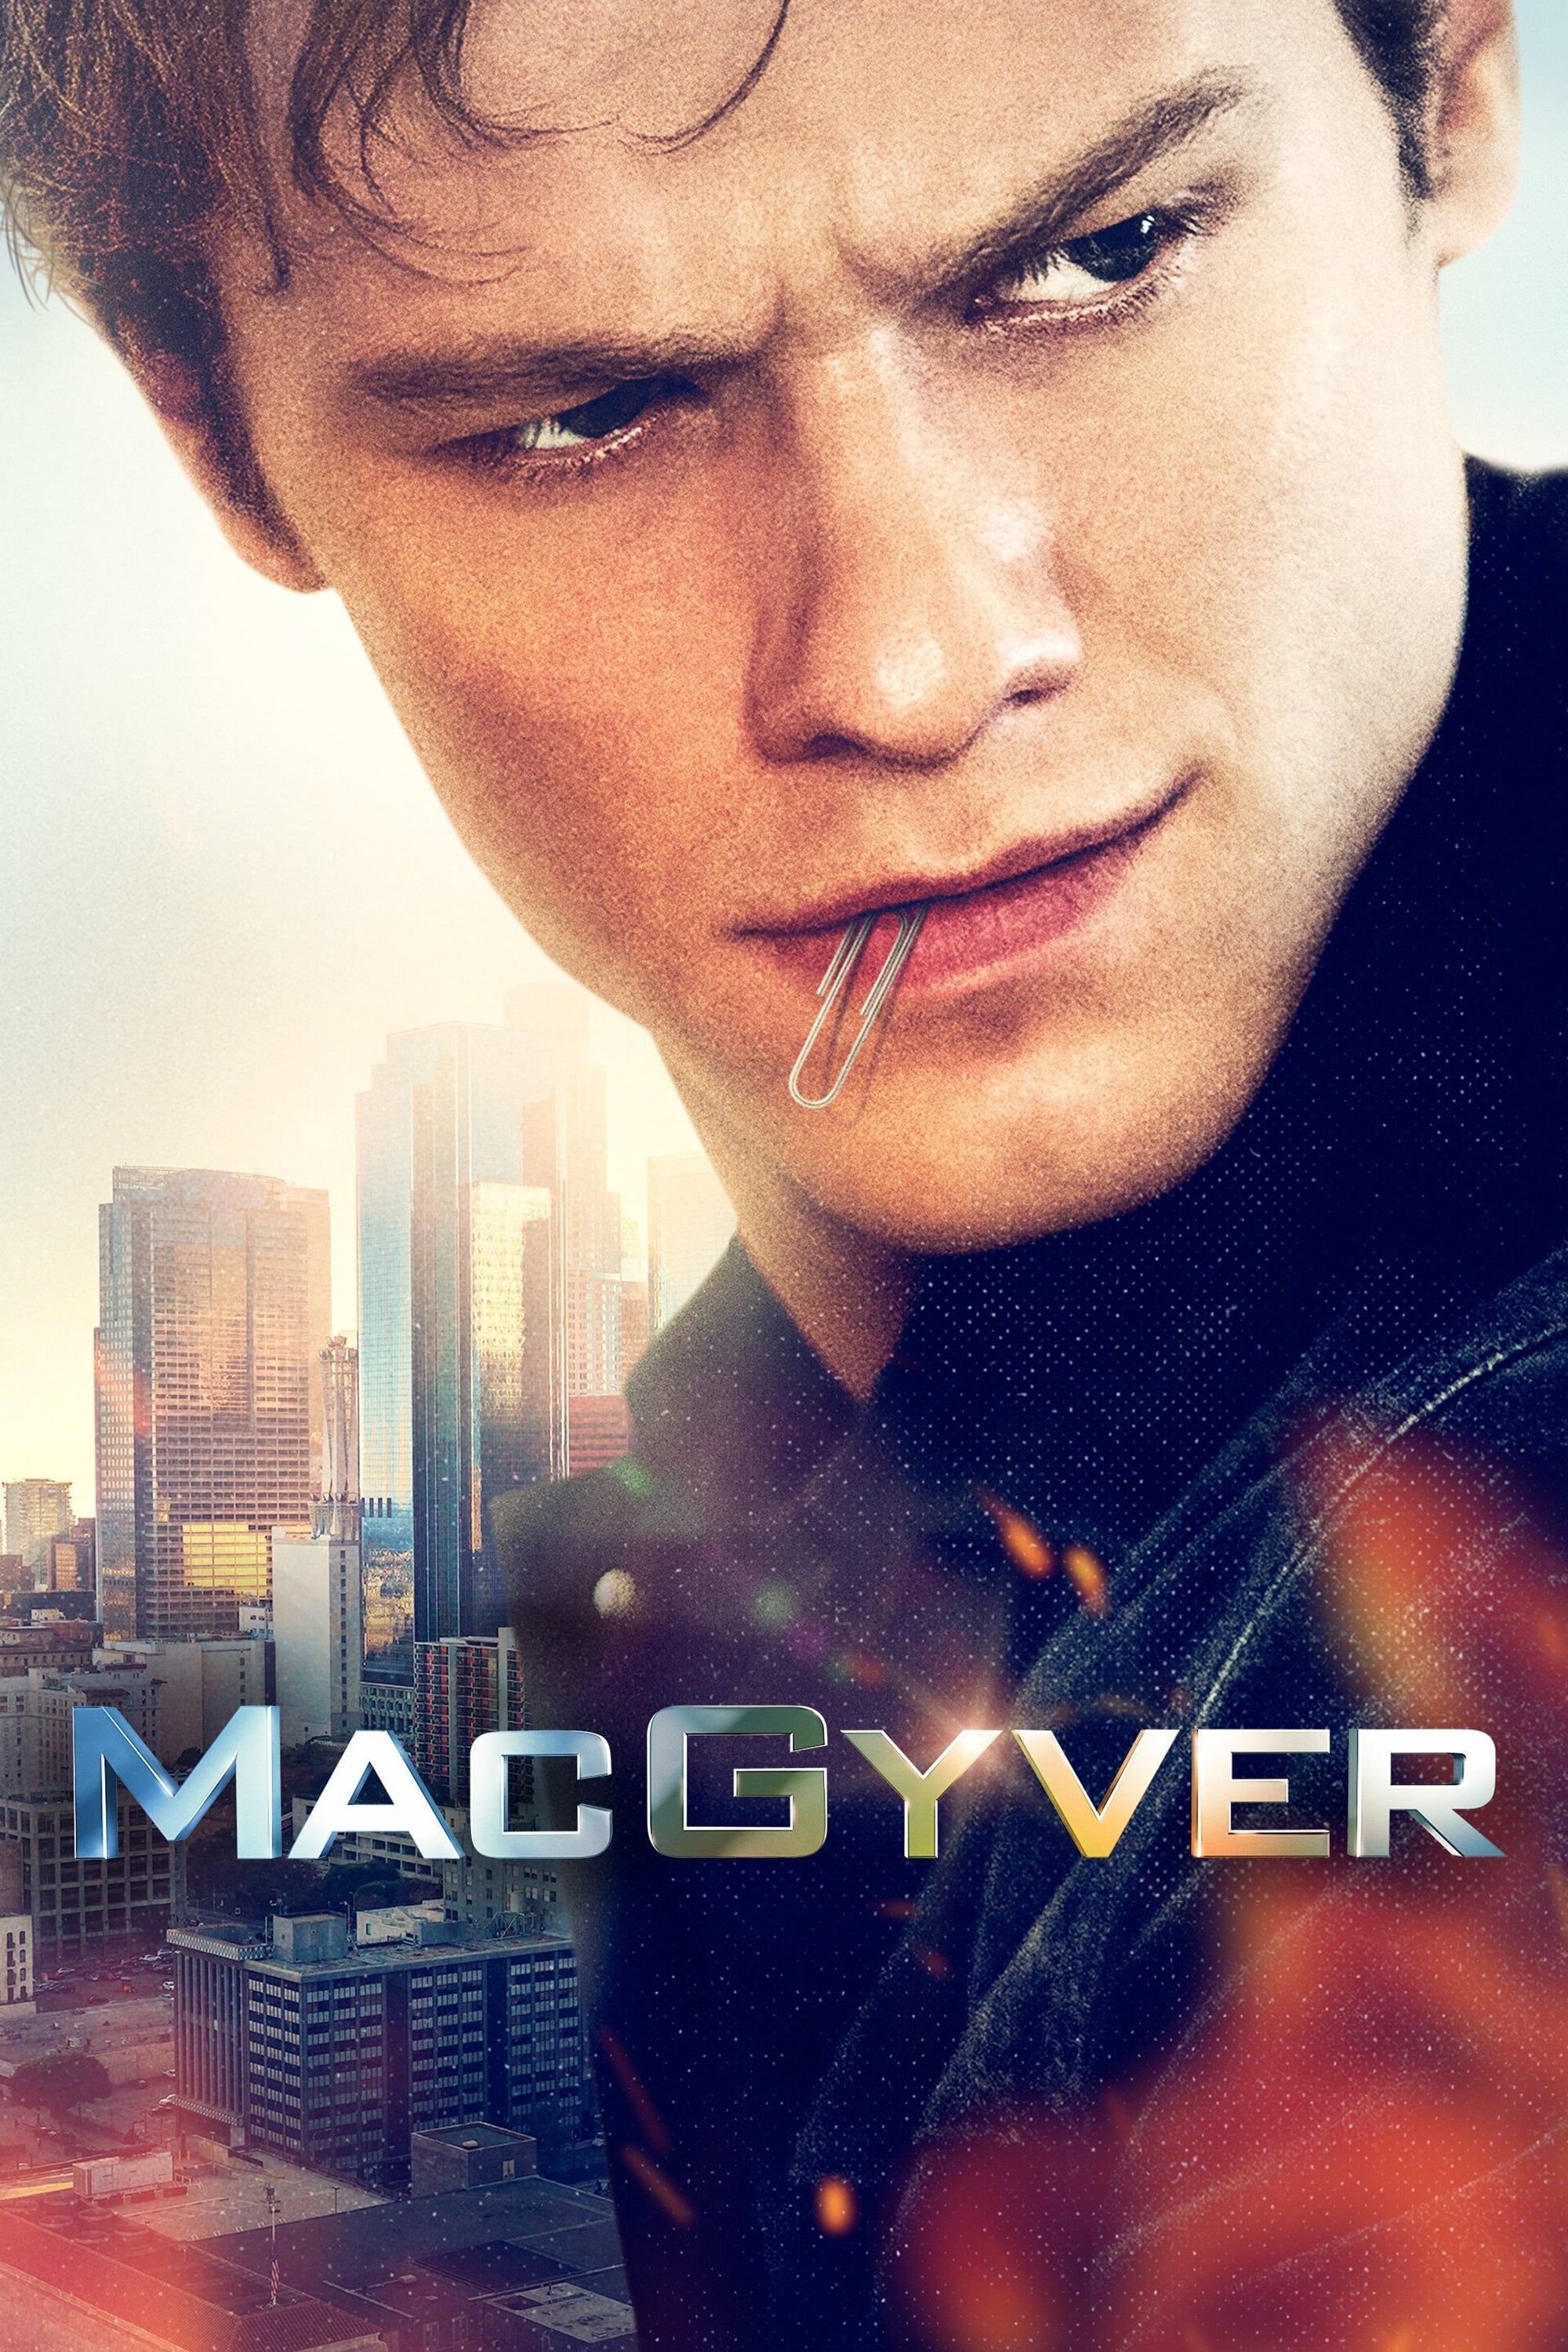 MacGyver TV Shows About Secret Government Organization